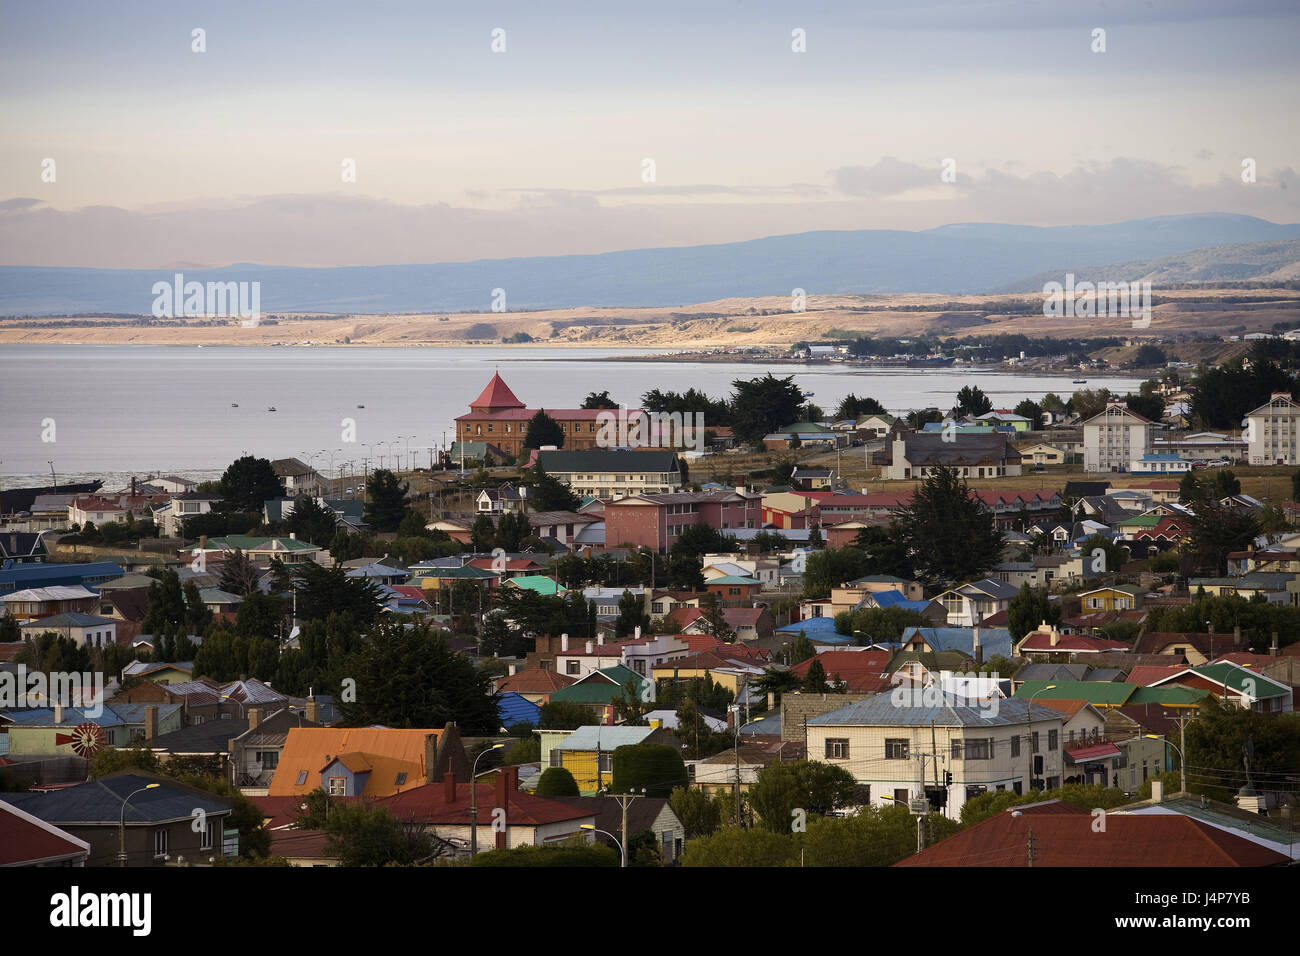 Chile, Patagonia, Punta Arenas, town overview, view, the Strait of Magellan, evening light, Stock Photo